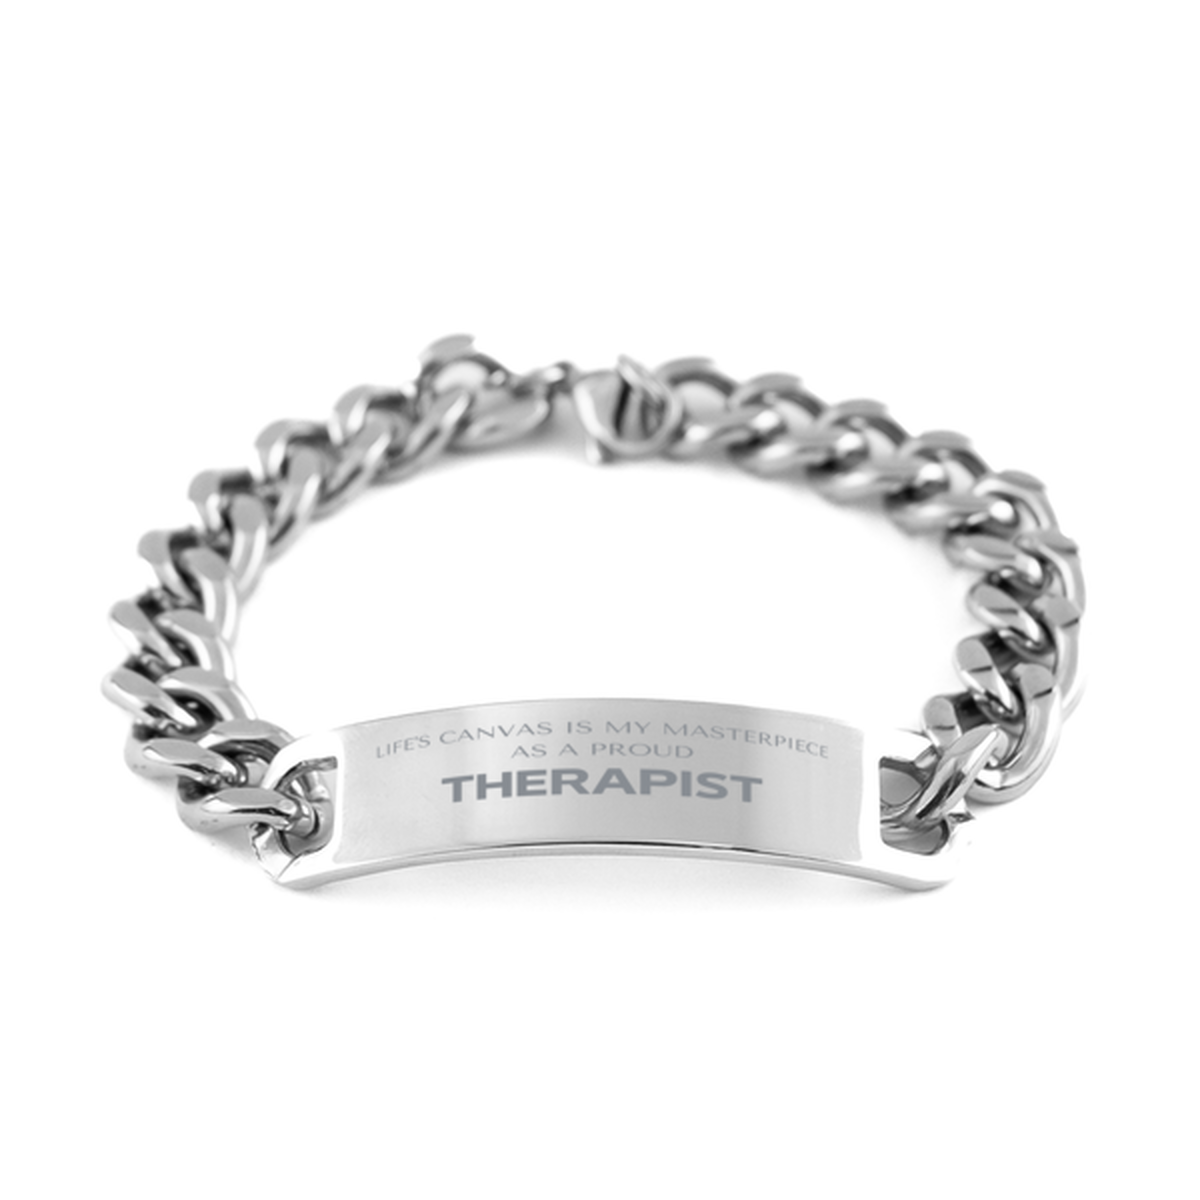 Proud Therapist Gifts, Life's canvas is my masterpiece, Epic Birthday Christmas Unique Cuban Chain Stainless Steel Bracelet For Therapist, Coworkers, Men, Women, Friends